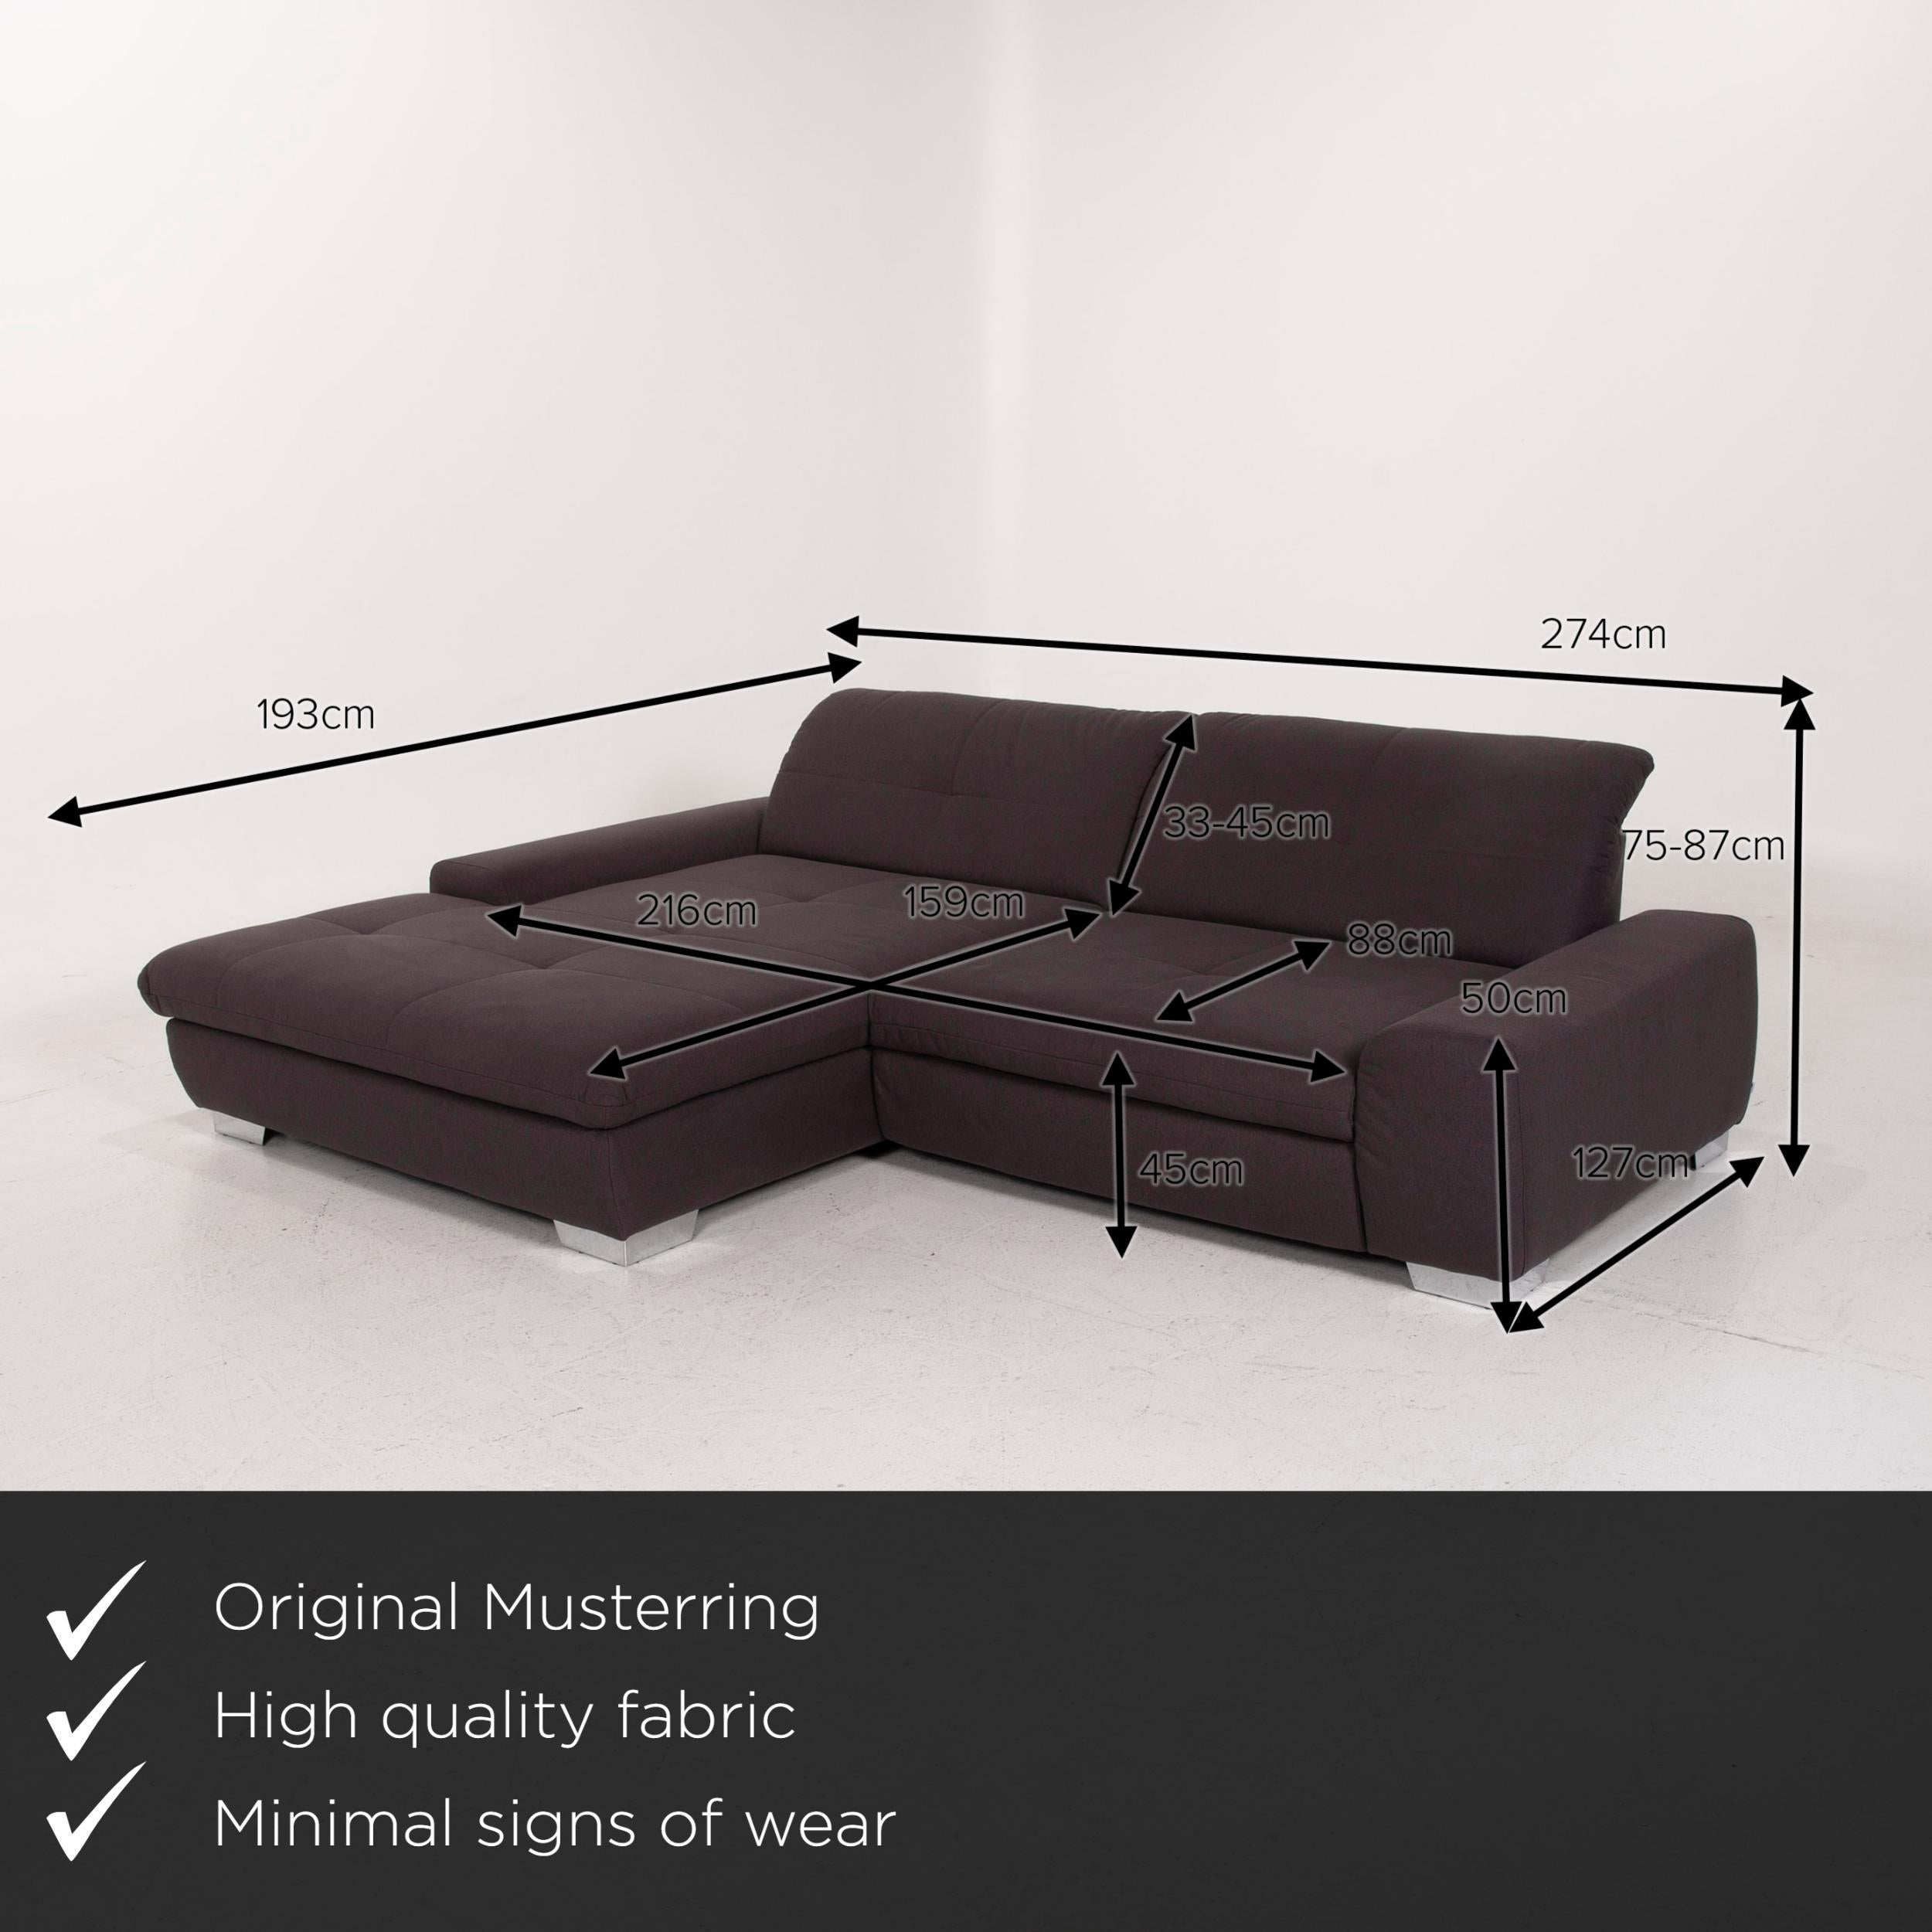 We present to you a Musterring fabric sofa anthracite corner sofa.

 

 Product measurements in centimeters:
 

Depth 193
Width 193
Height 75
Seat height 45
Rest height 50
Seat depth 159
Seat width 216
Back height 33.